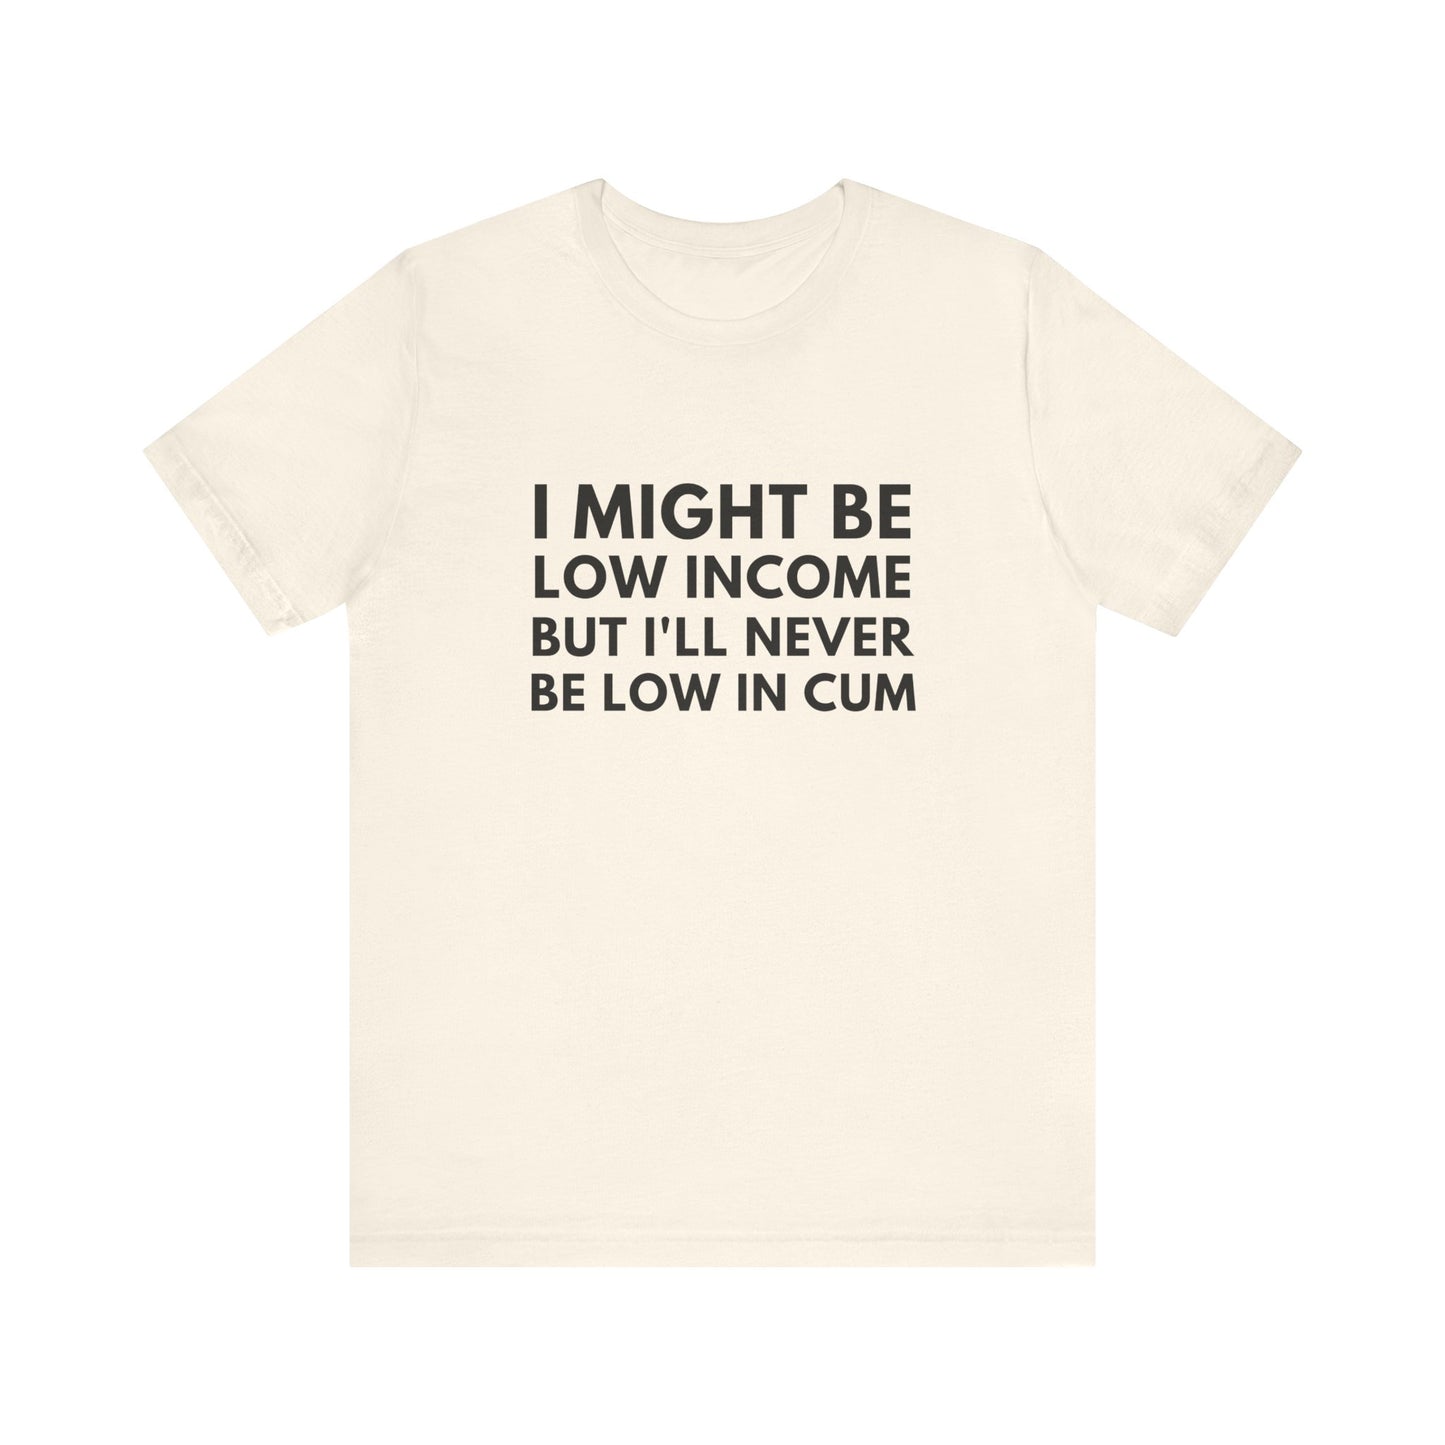 I Might Be Low Income But I'll Never Be Low In Cum Funny Unisex T-Shirt